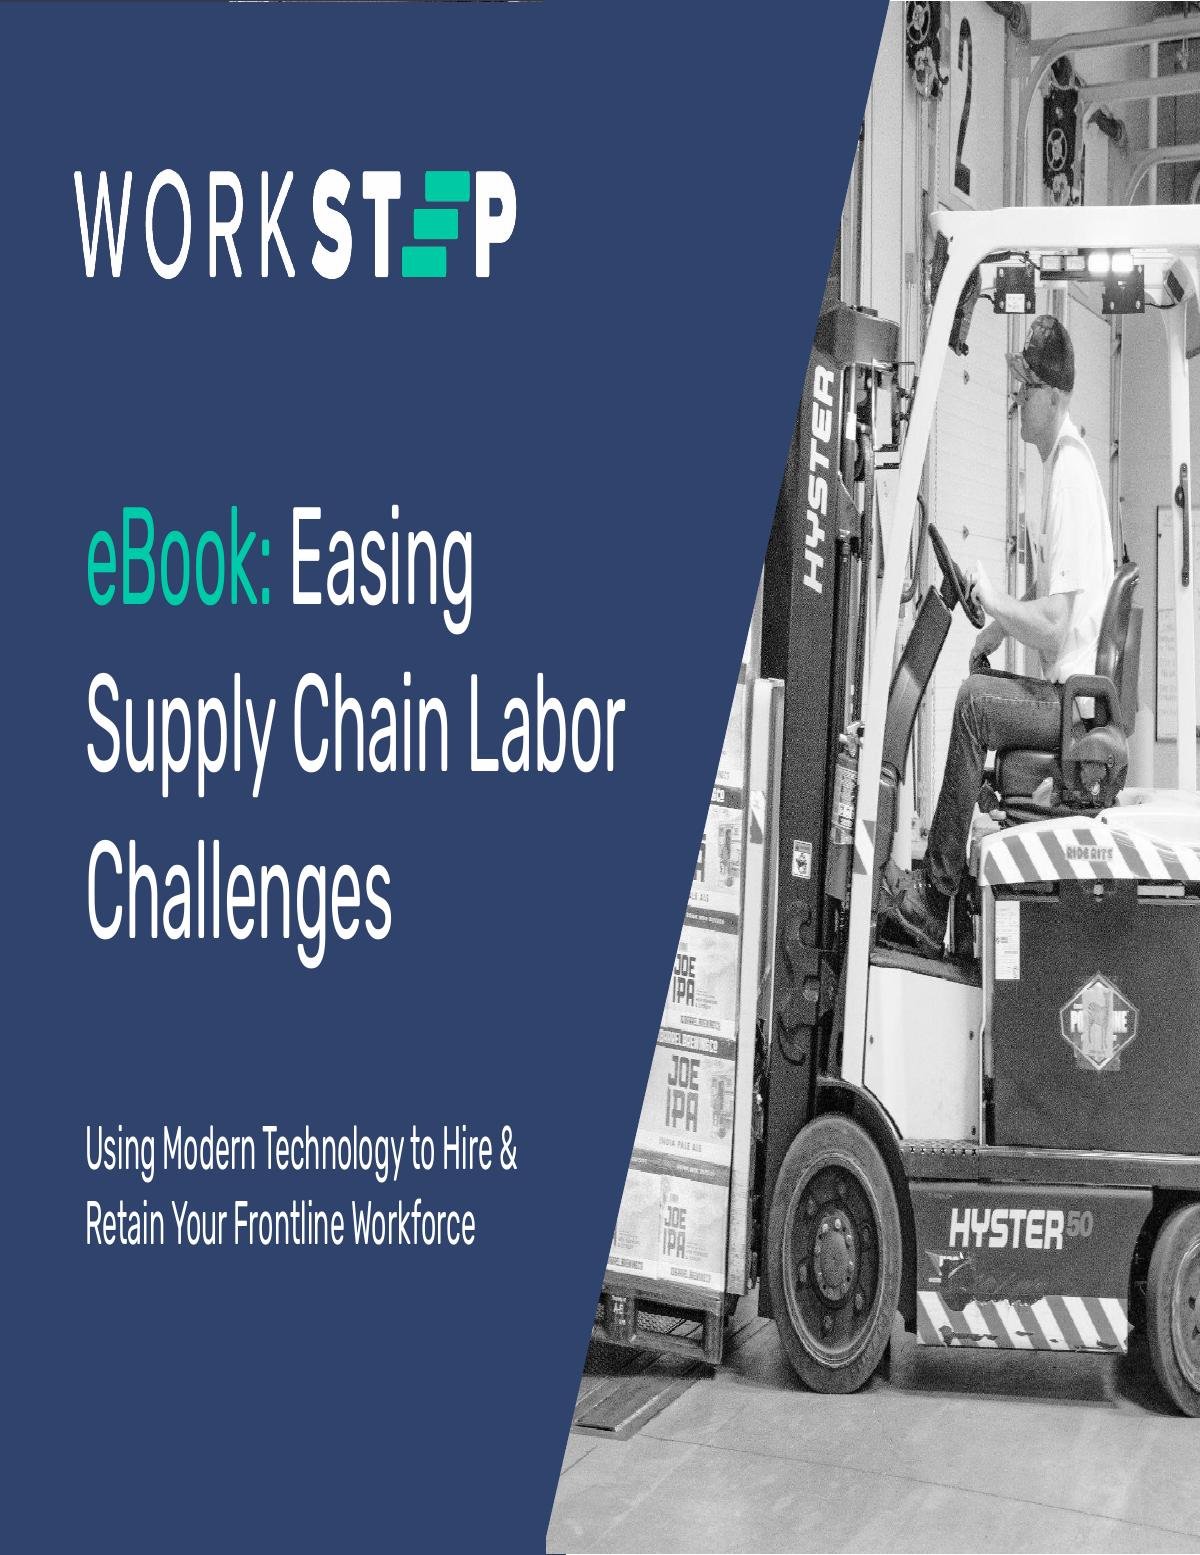 WorkStep eBook: Easing Supply Chain Labor Challenges